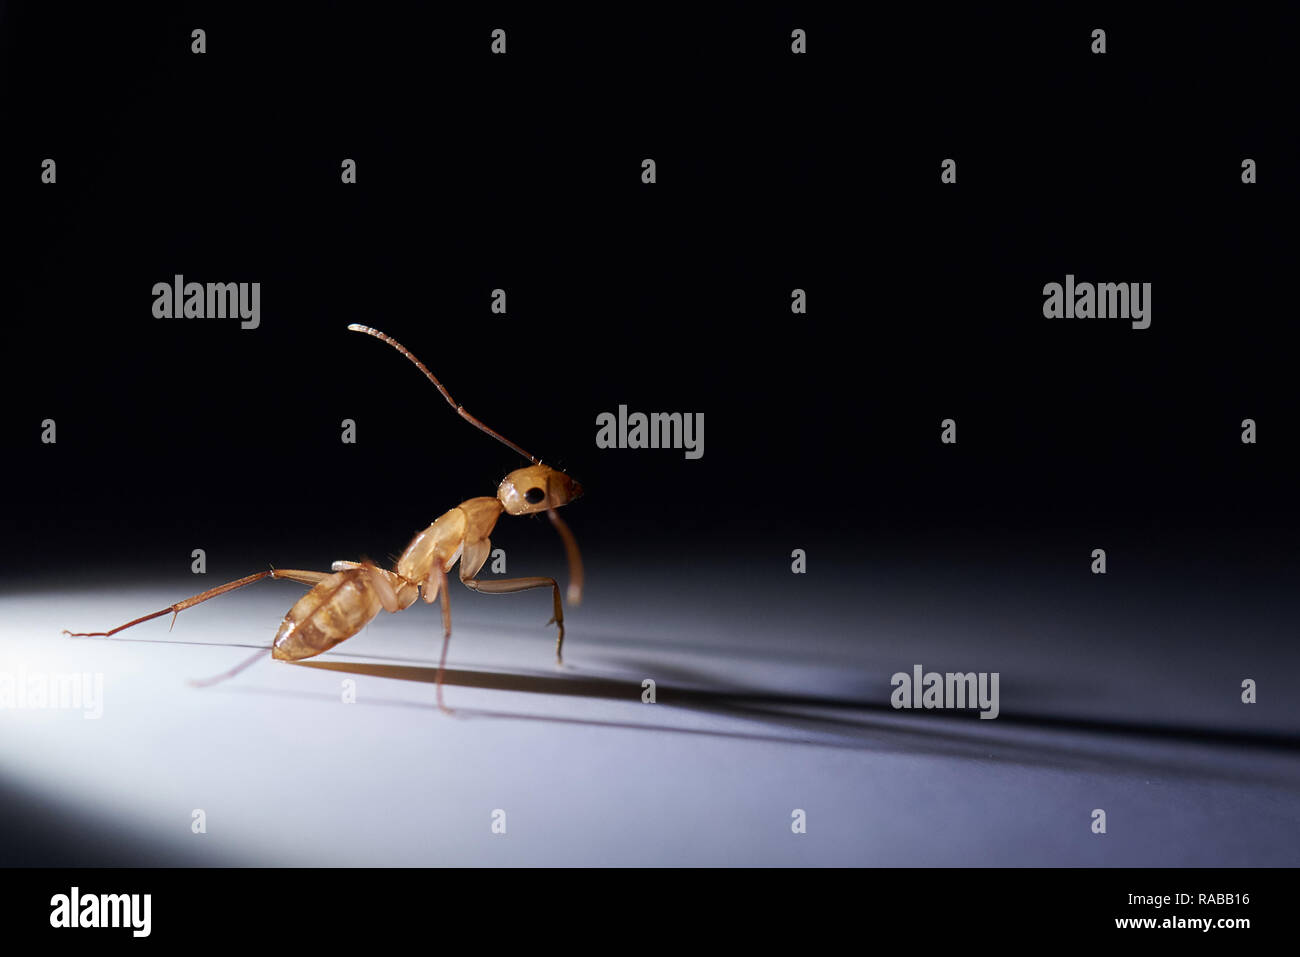 One brown ant on black background illuminated with light Stock Photo